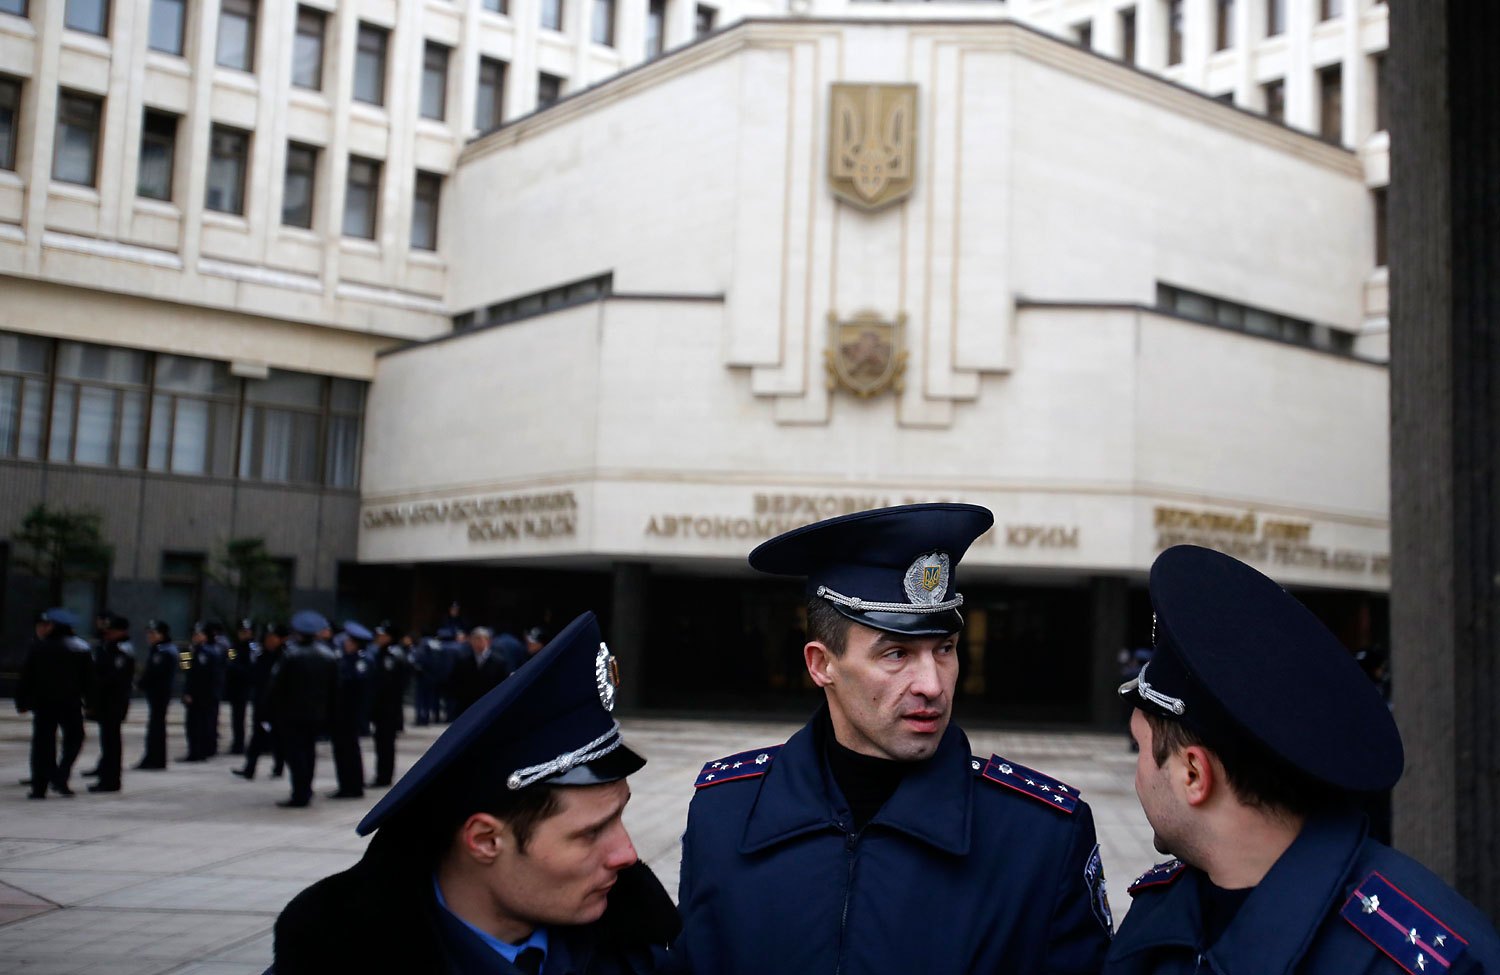 Ukrainian police officers guard local government building during a protest in Simferopol, Feb. 26, 2014.